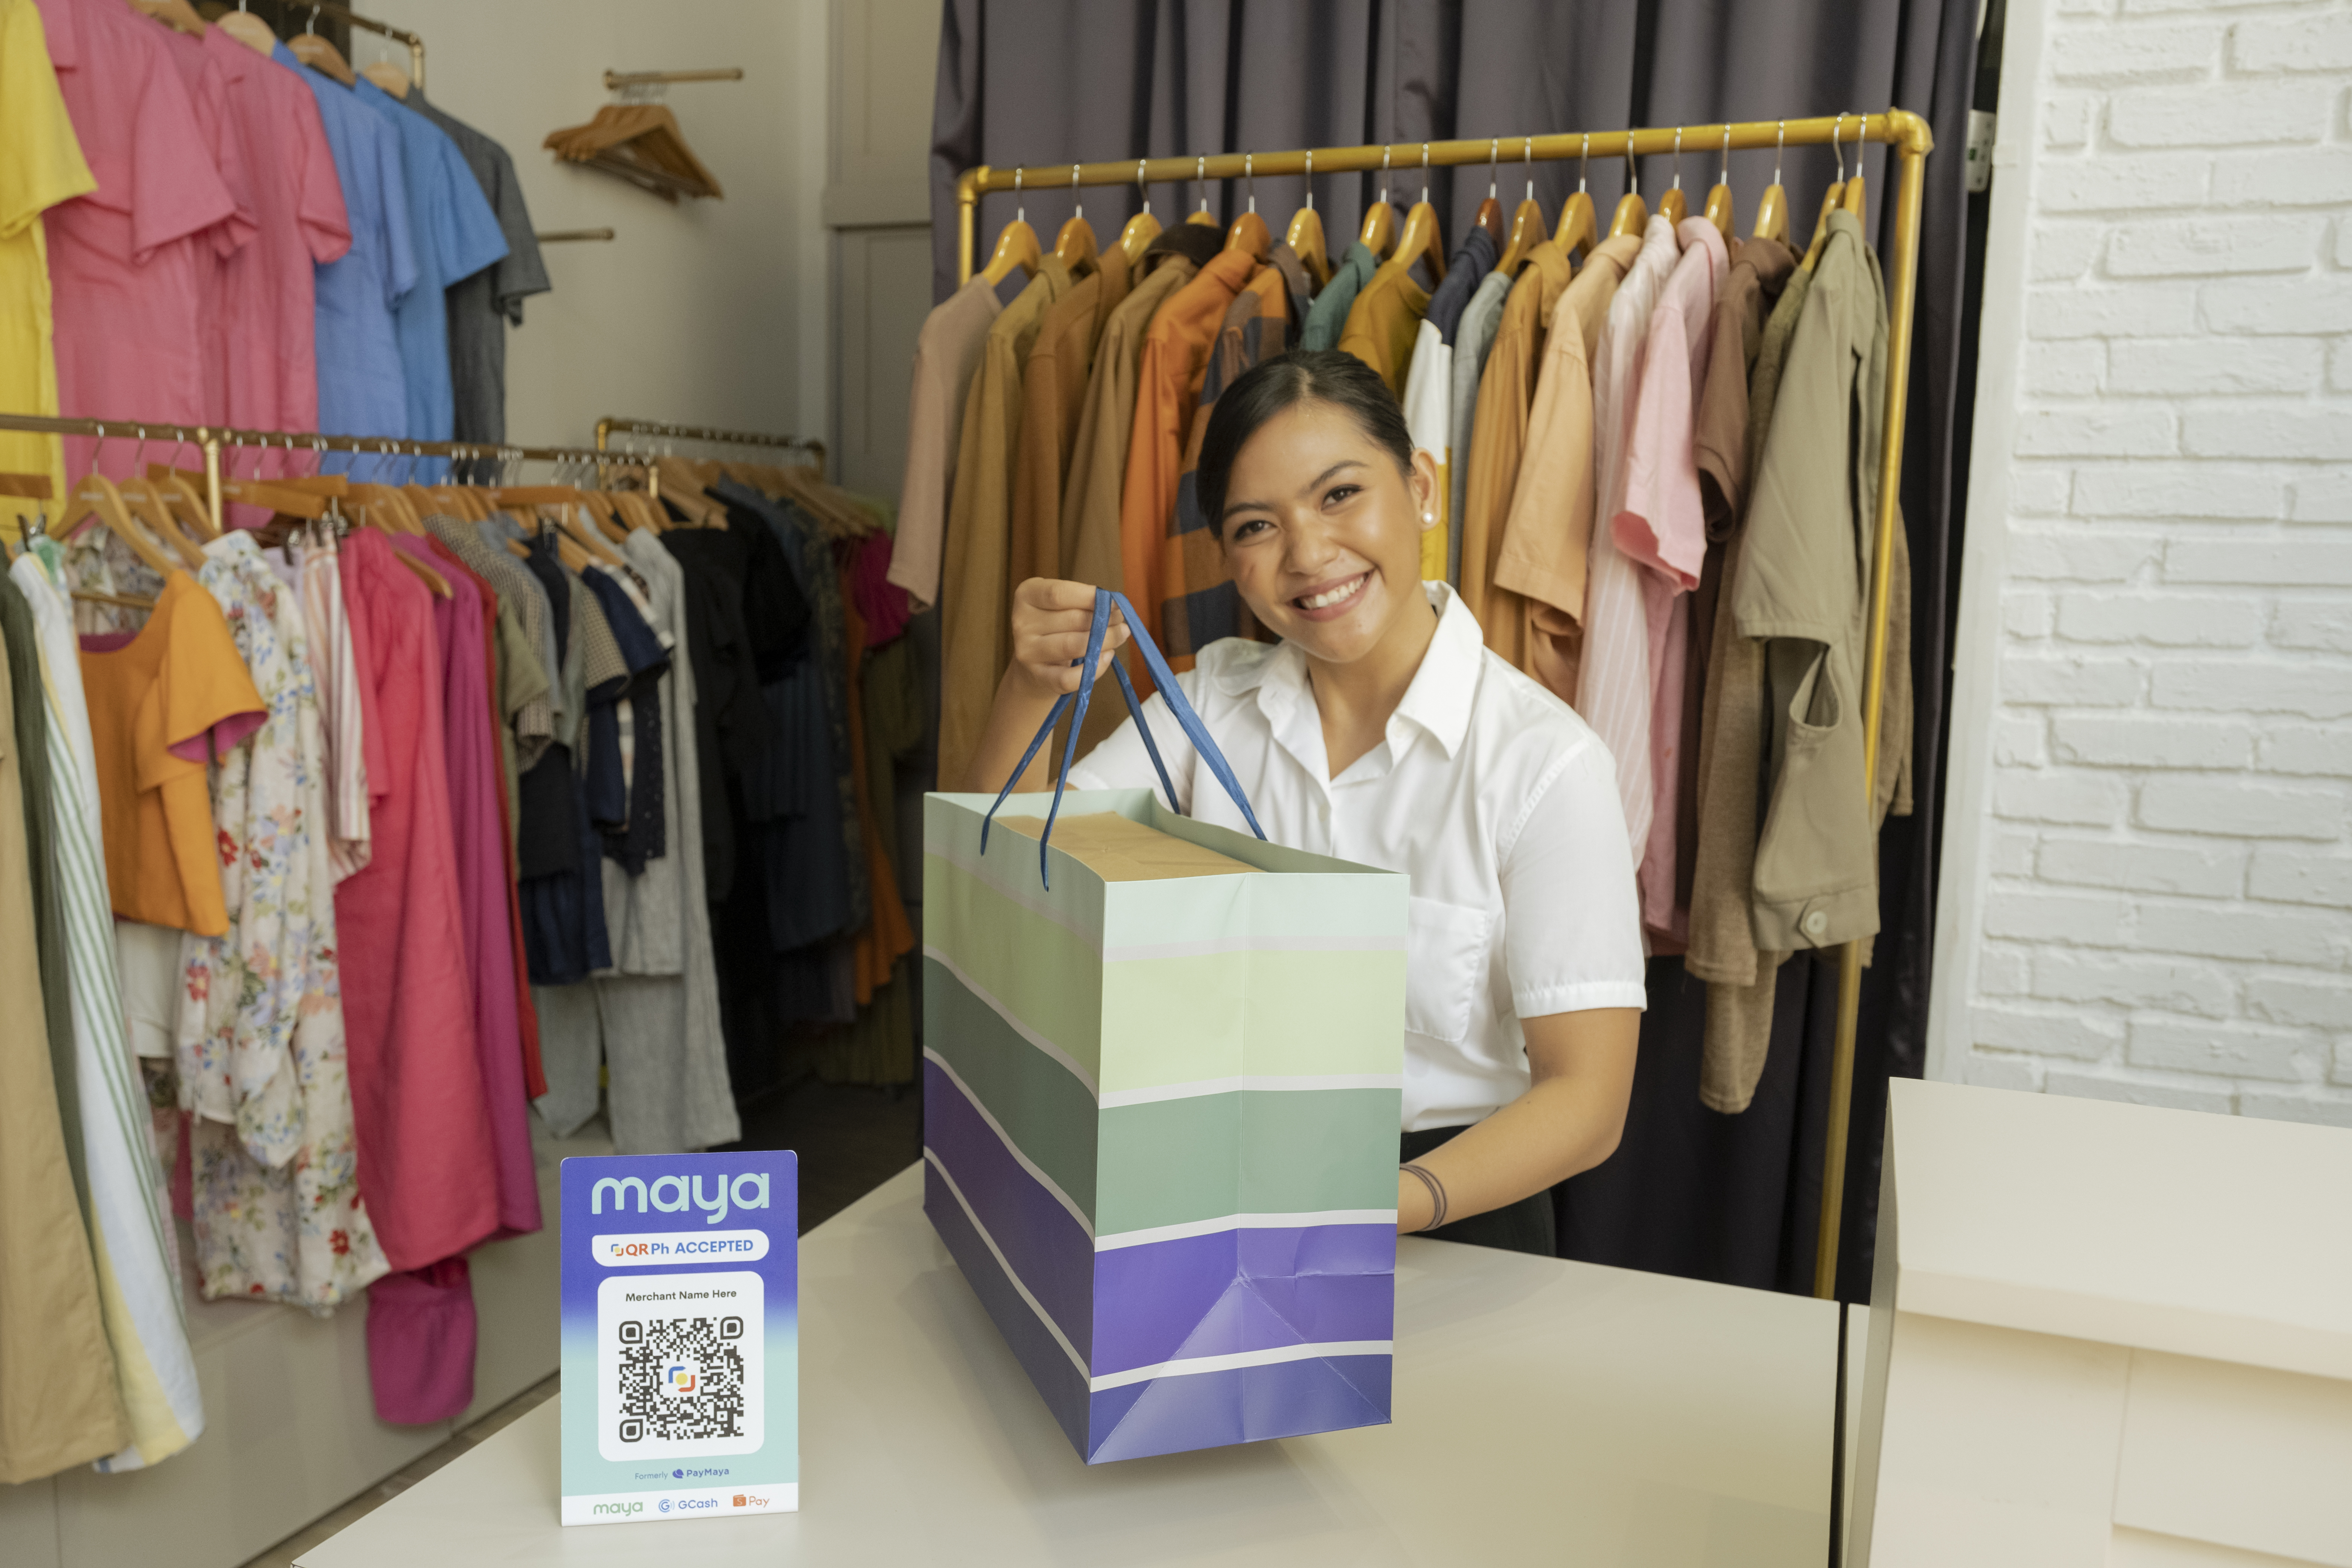 5 New Ways to Attract More Customers to Your Physical Store